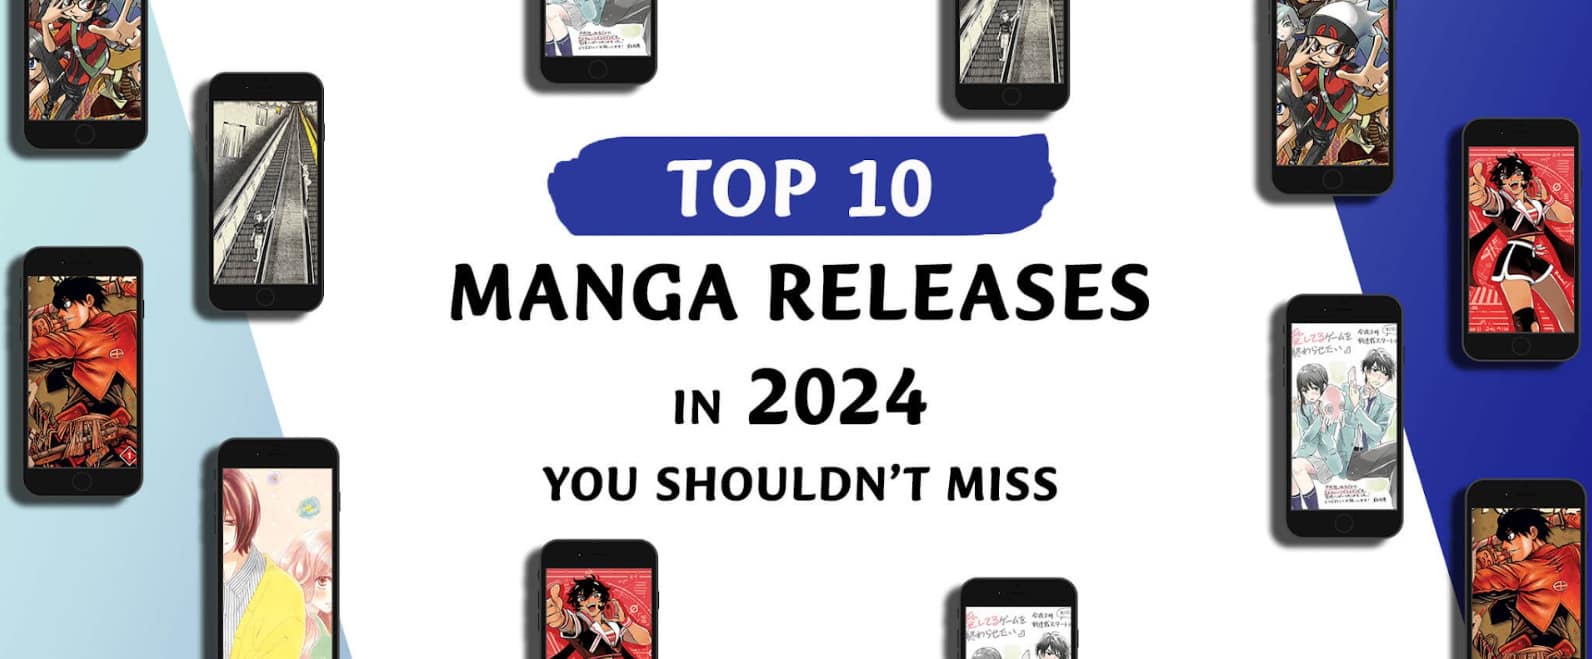 2024 will be amazing for shoujo fans!! what other shoujo mangas